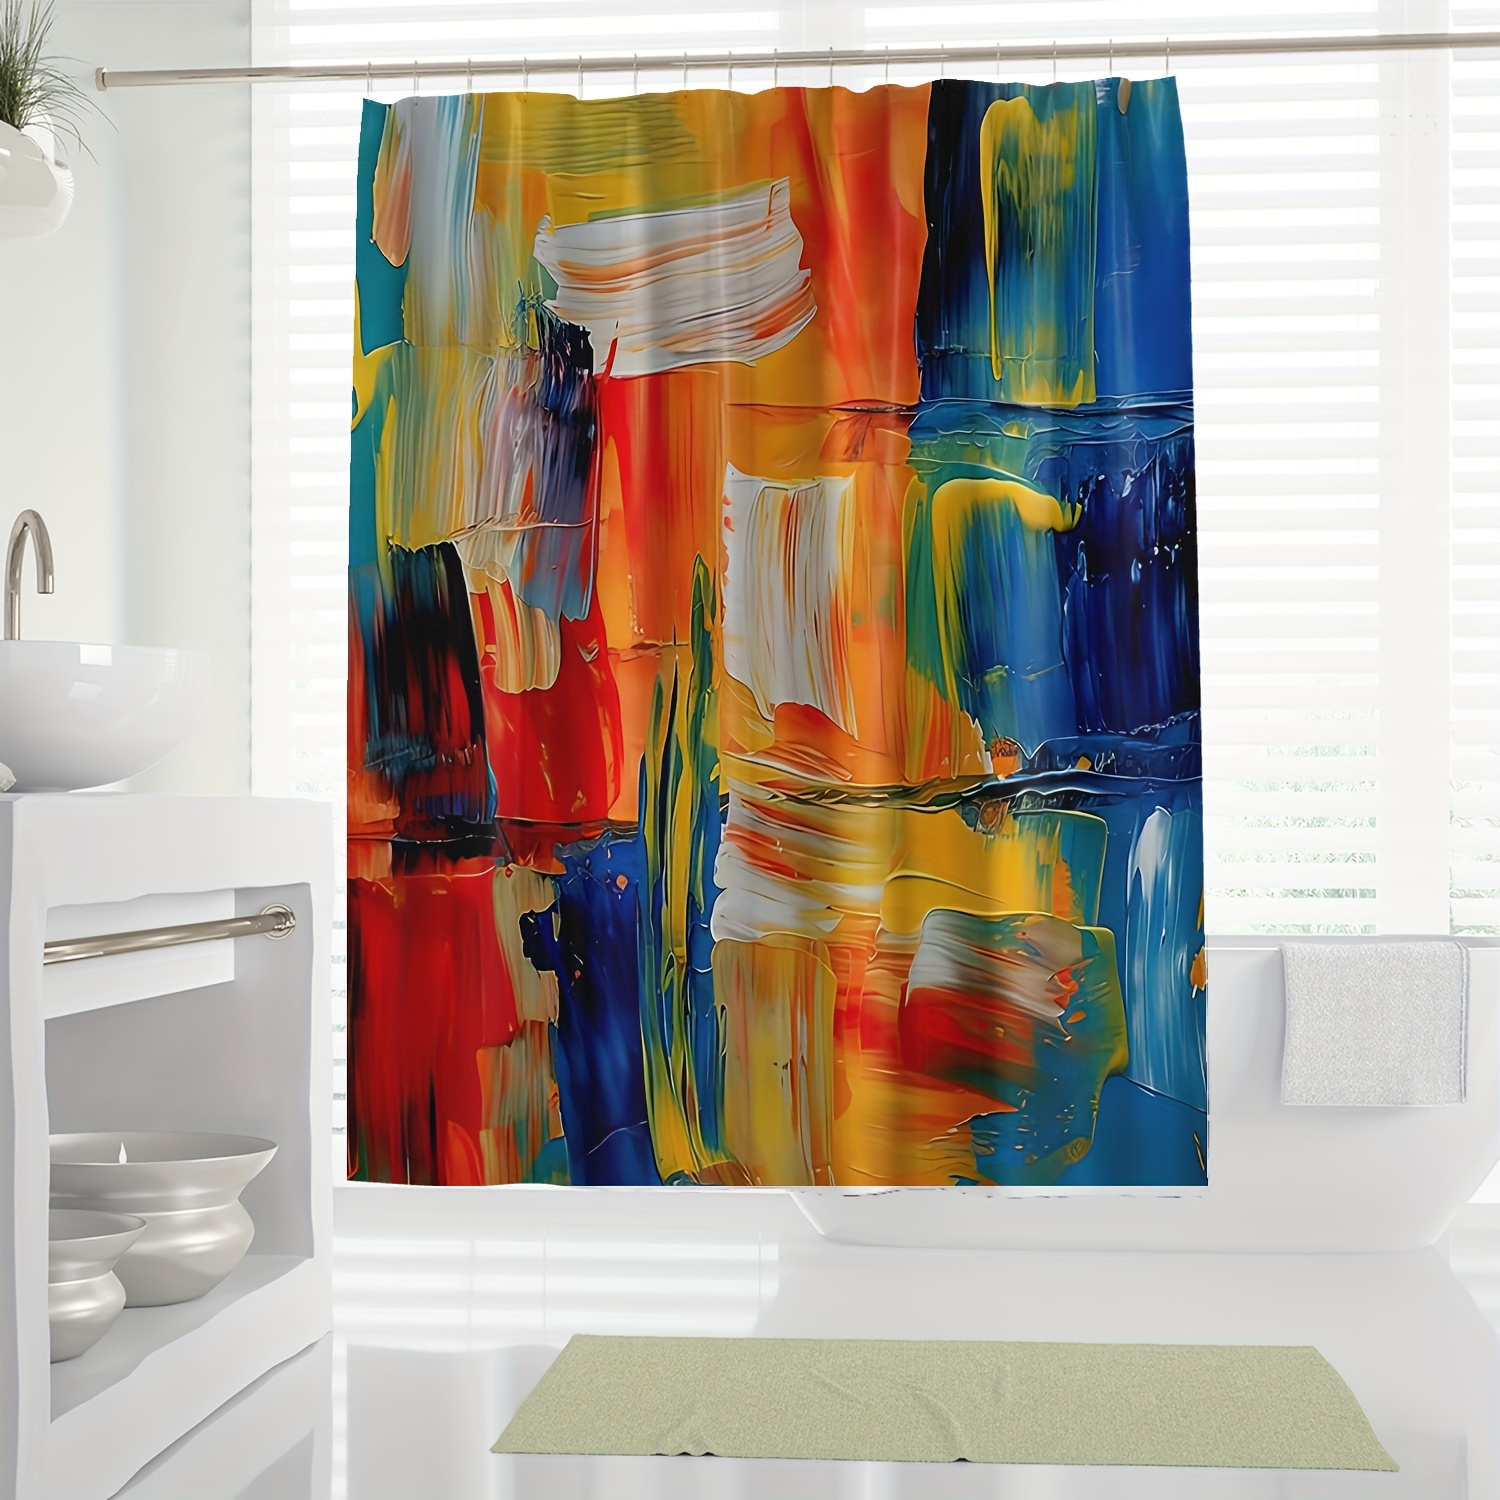 

1pc Abstract Art Shower Curtain, Modern Primary Colors Oil Painting Digital Print, Waterproof Fabric Bath Decor, 70.87"x70.87" With Hooks Included, Bathroom Accessories